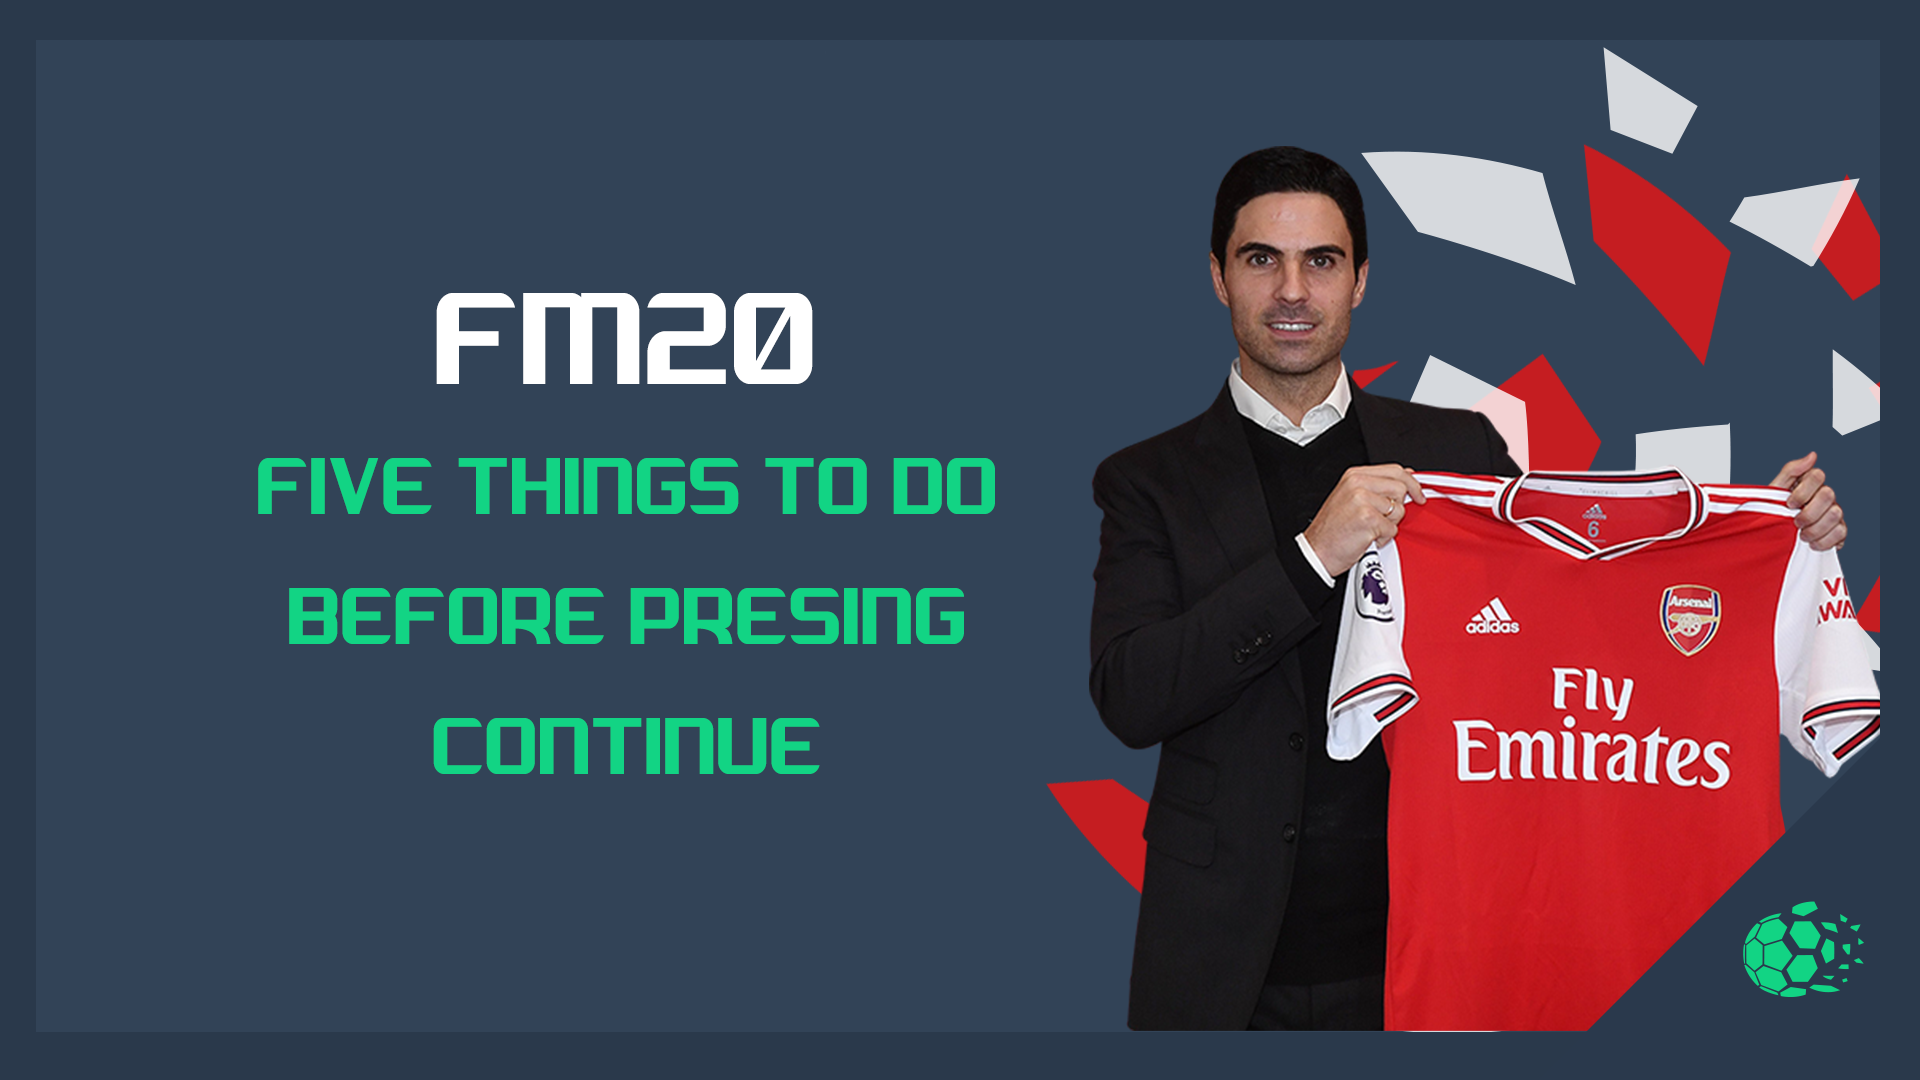 FM20 FM20: 5 Things To Do Before Pressing Continue